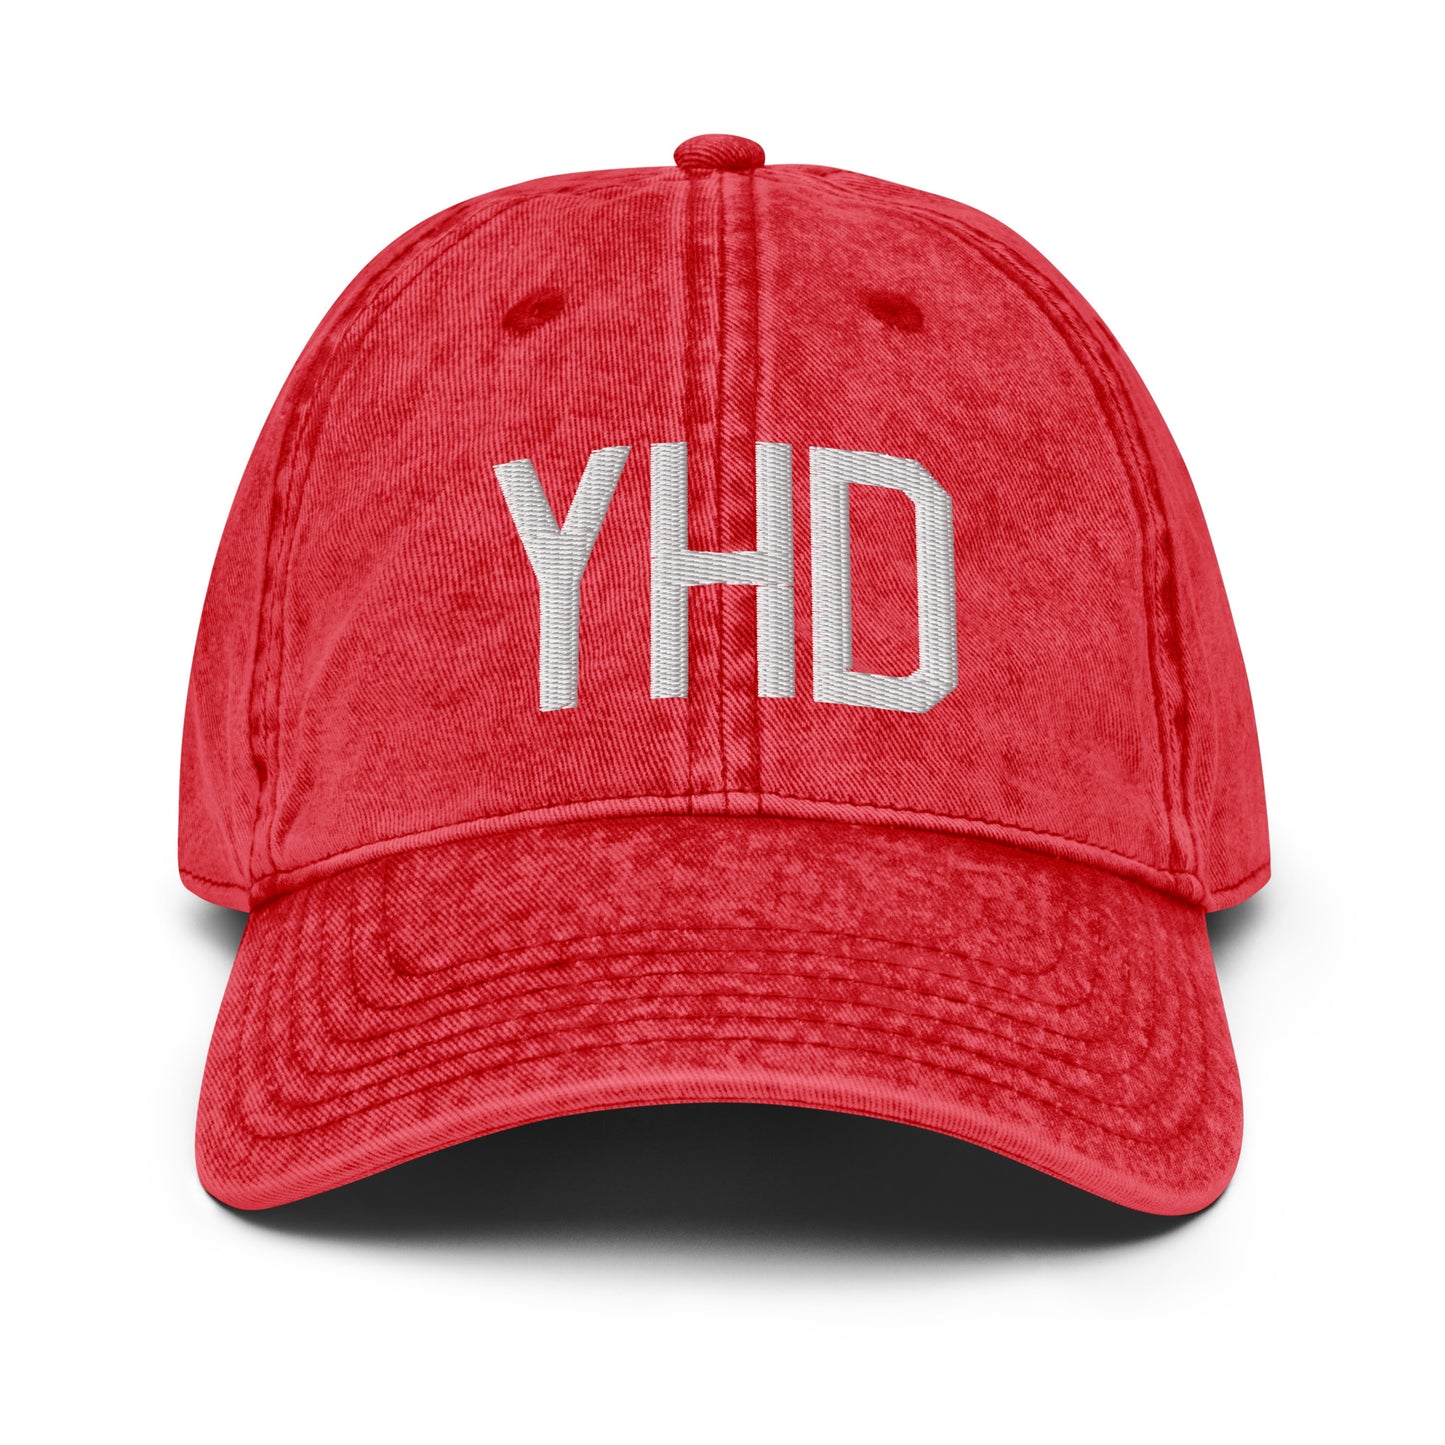 Airport Code Twill Cap - White • YHD Dryden • YHM Designs - Image 22